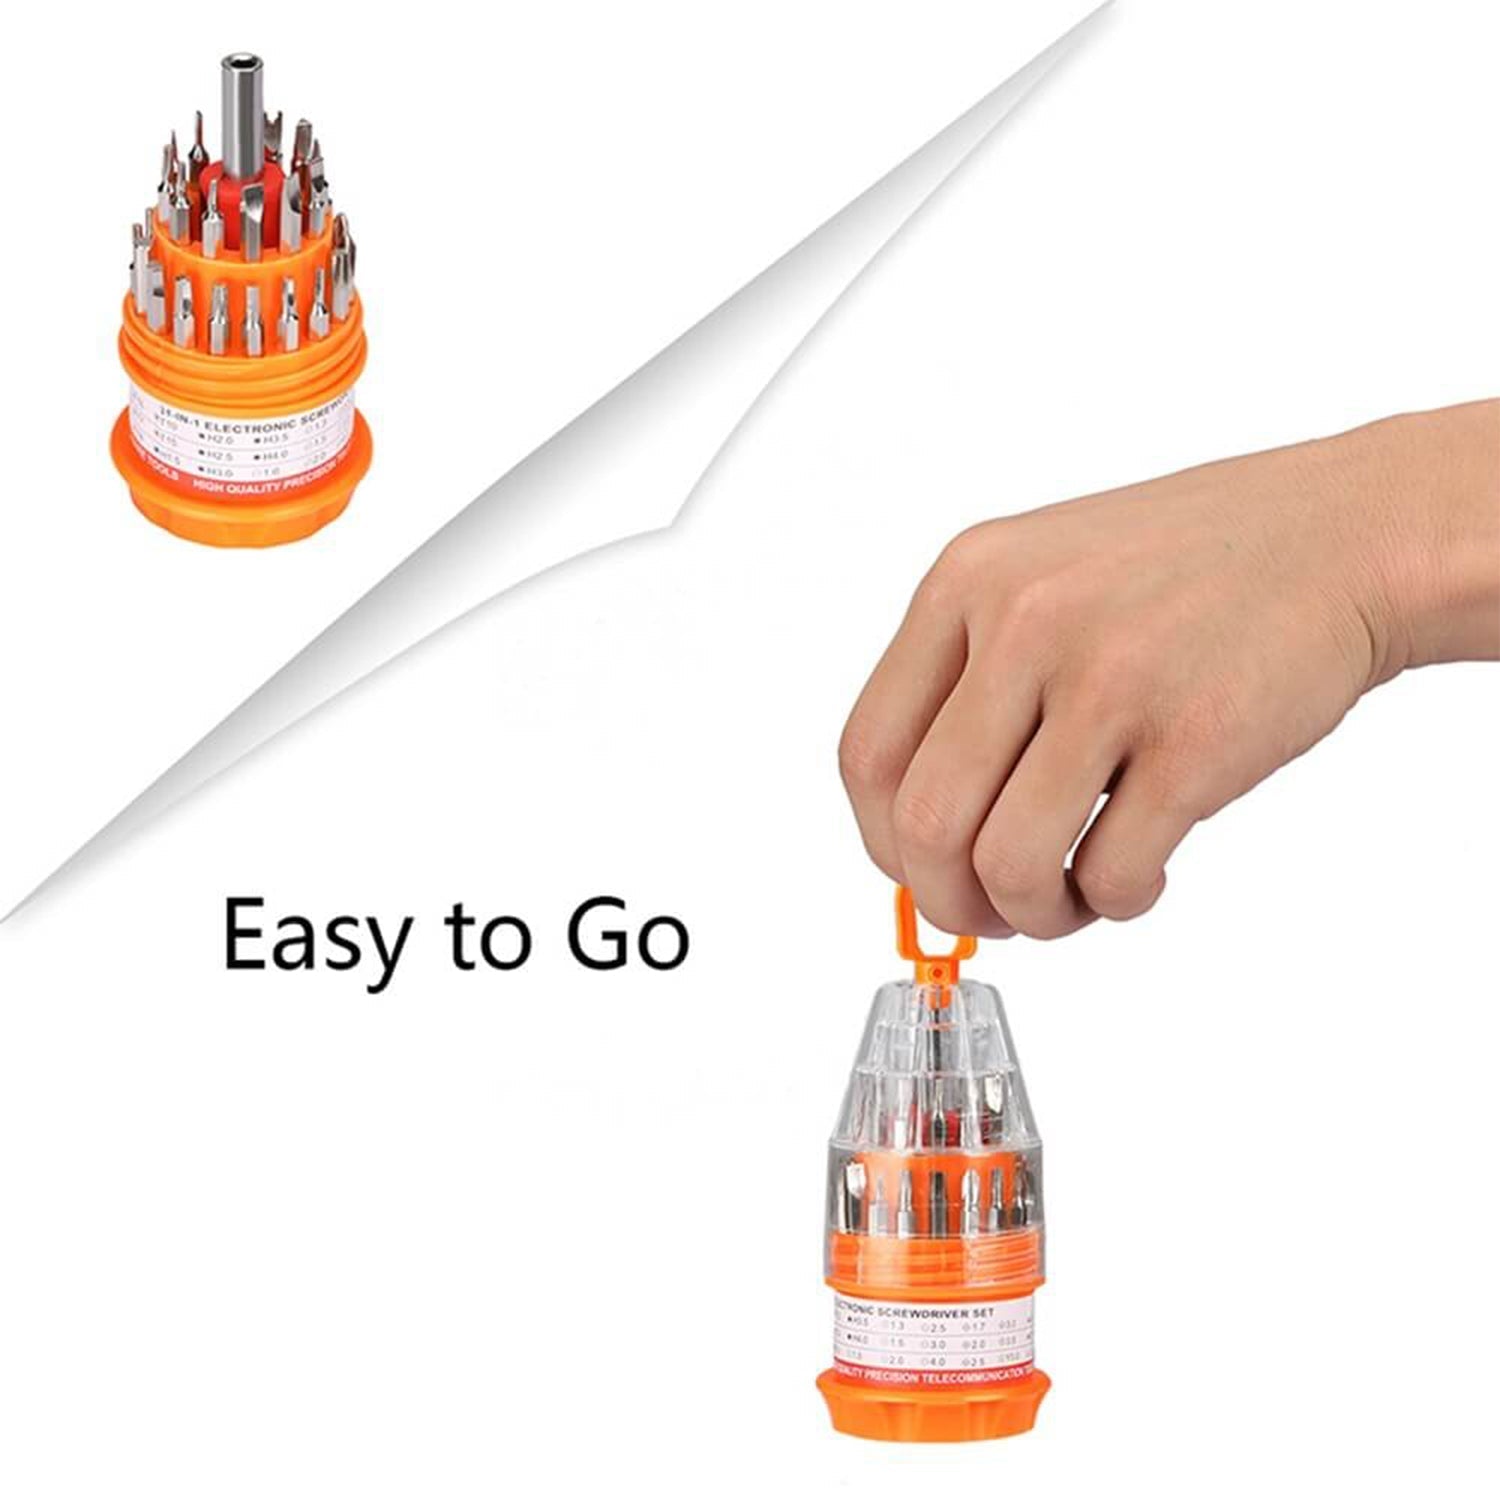 9110 (SET OF 4PC) SCREWDRIVER SET, STEEL 31 IN 1 WITH 30 SCREWDRIVER BITS, PROFESSIONAL MAGNETIC DRIVER SET 